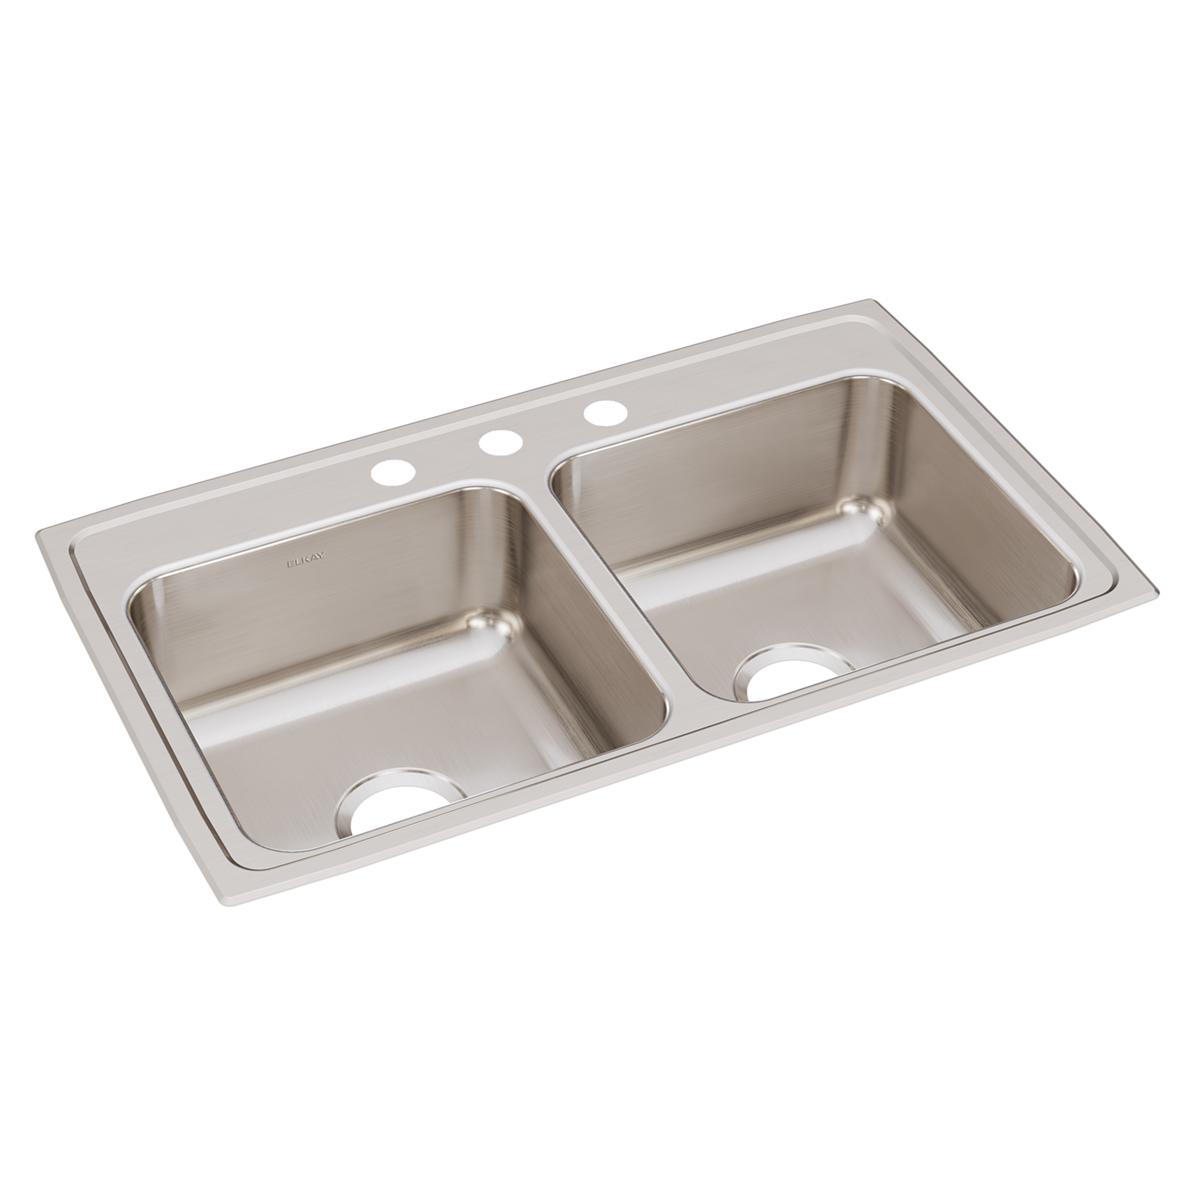 Elkay Lustertone Classic 33" x 19-1/2" x 7-5/8" Equal Double Bowl Drop-in Sink with Quick-clip